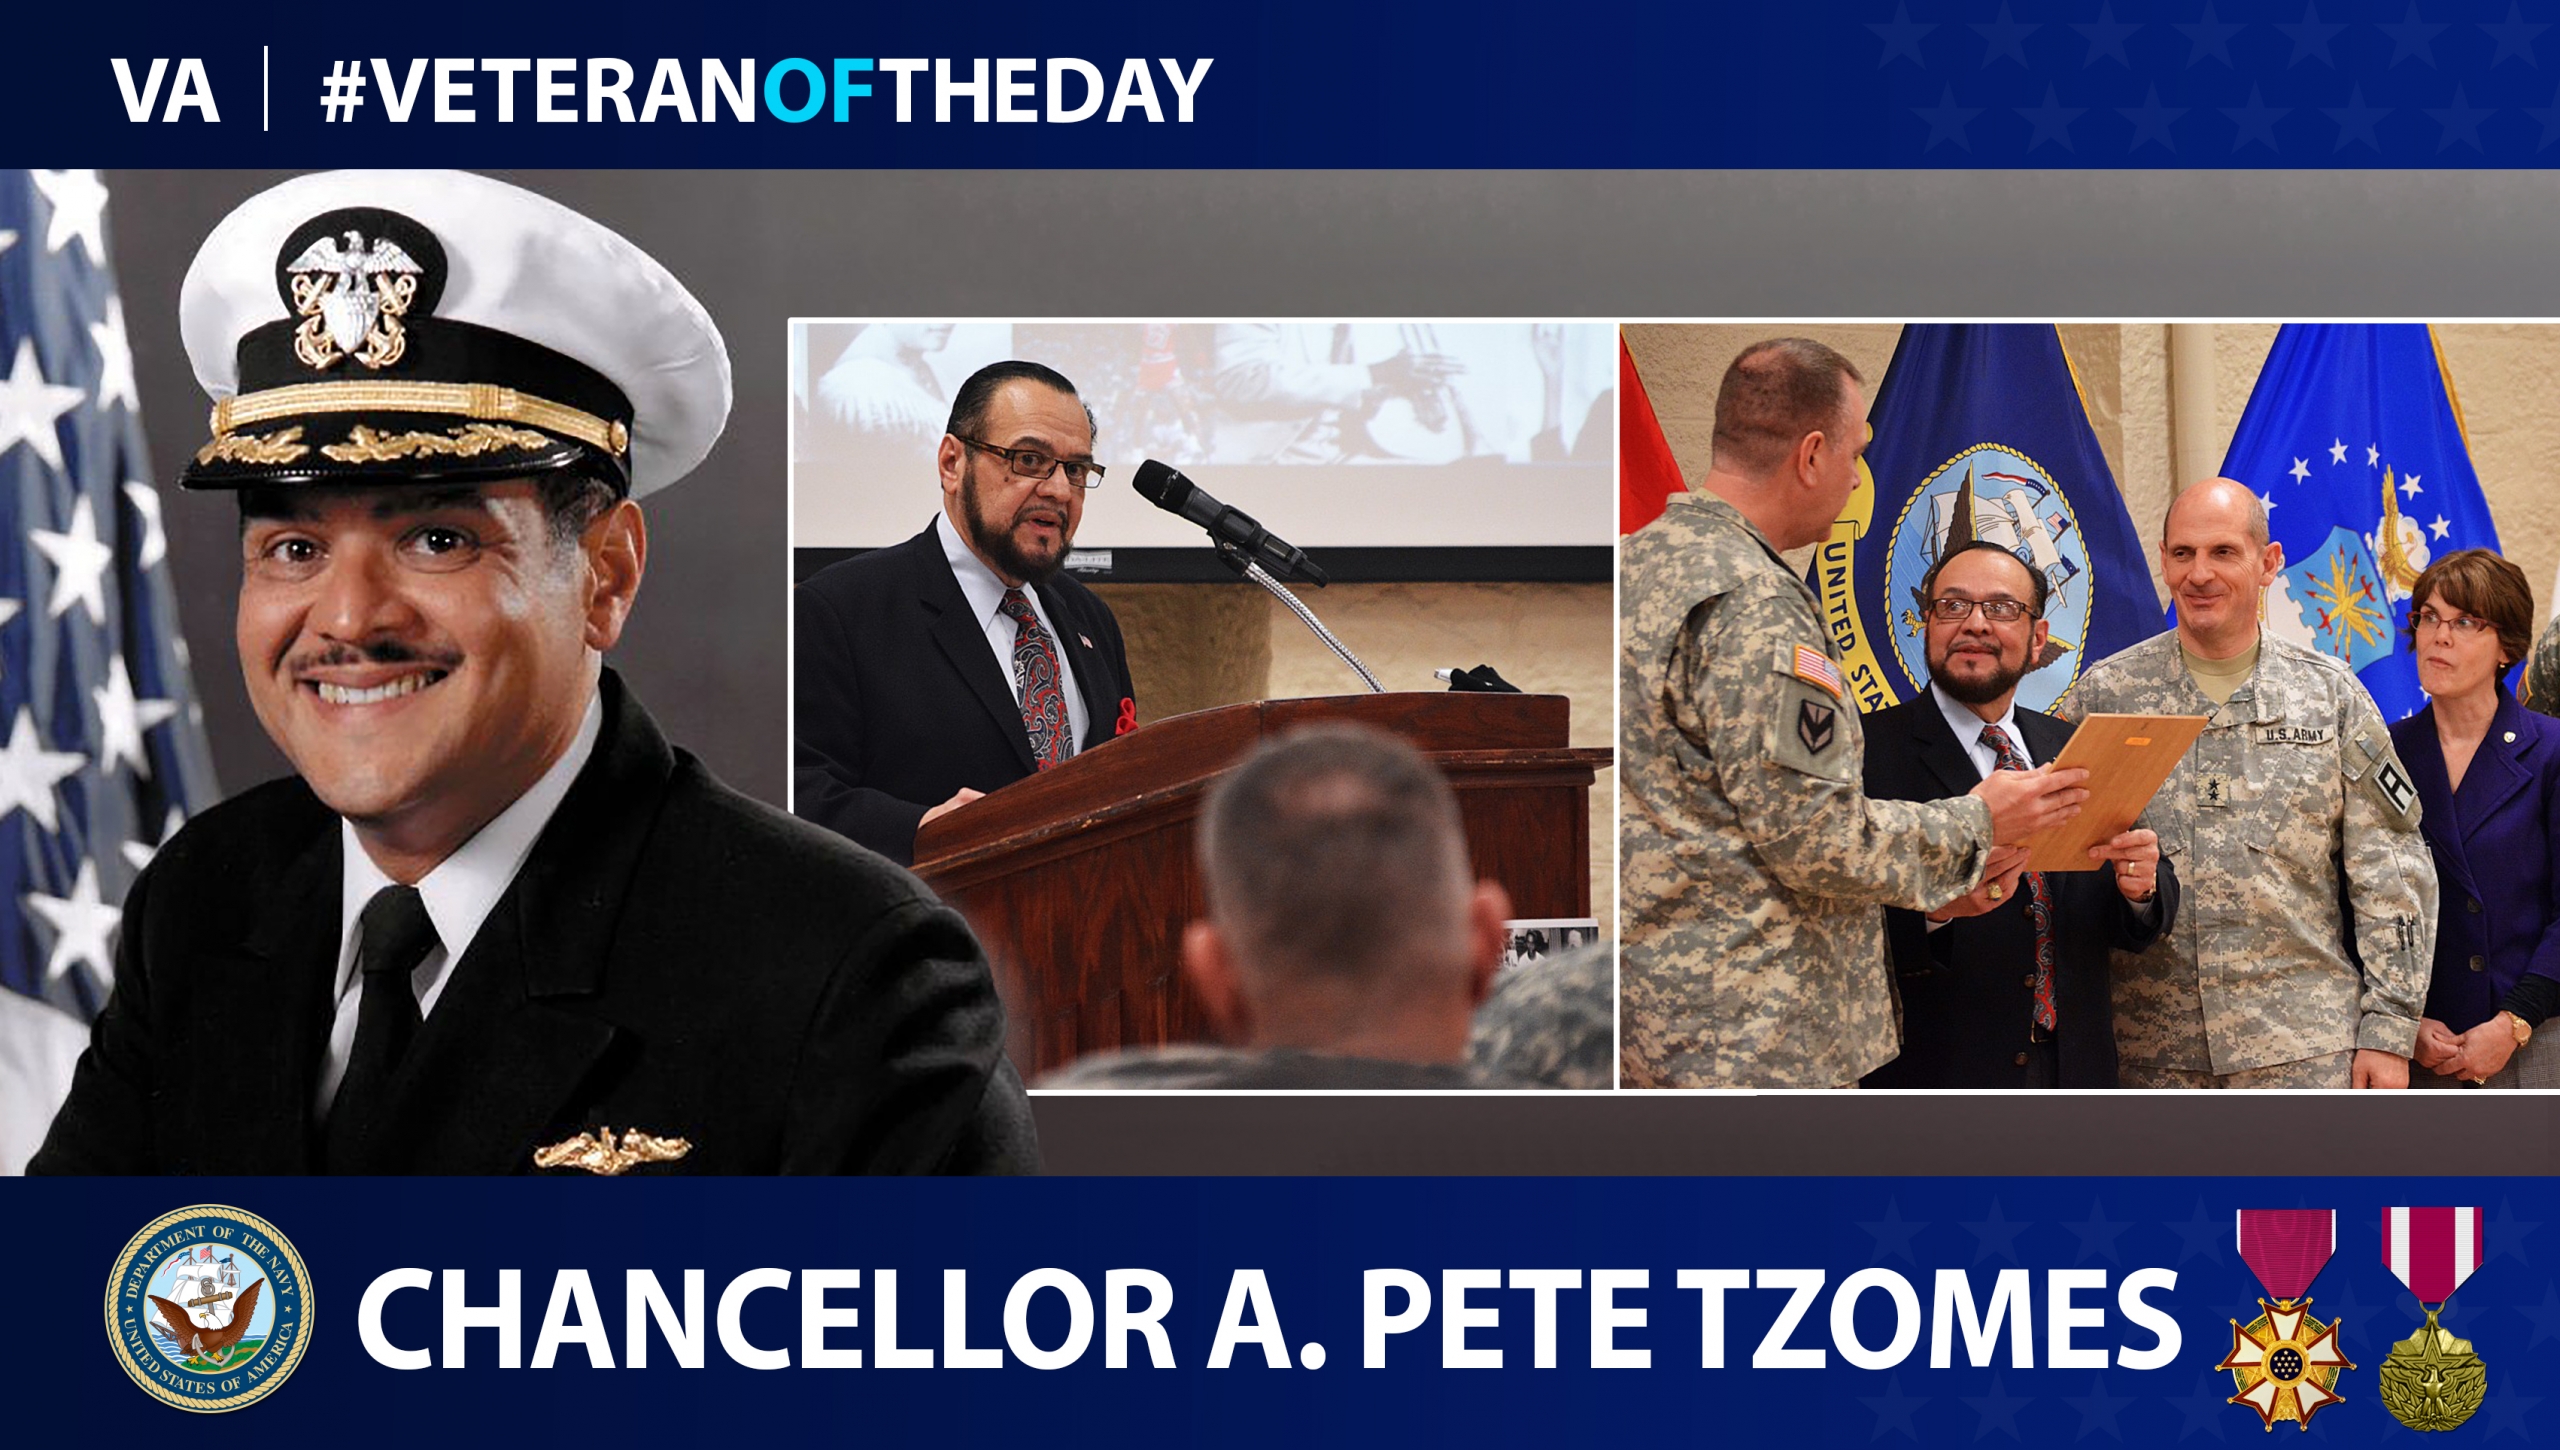 Navy Veteran Pete Tzomes is today’s Veteran of the Day.